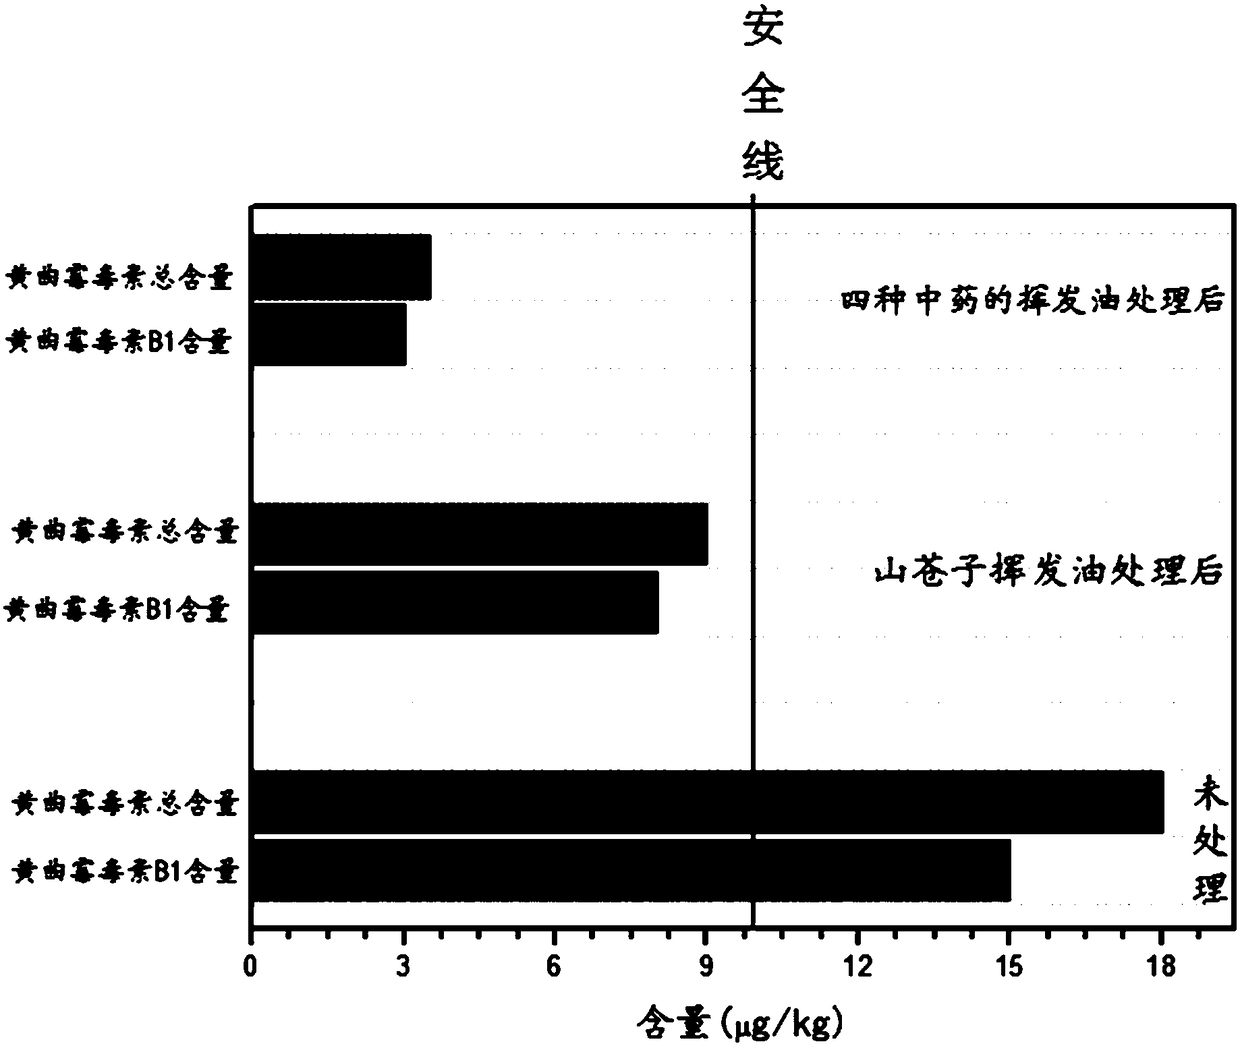 Method for degrading aflatoxin by traditional Chinese medicine formula